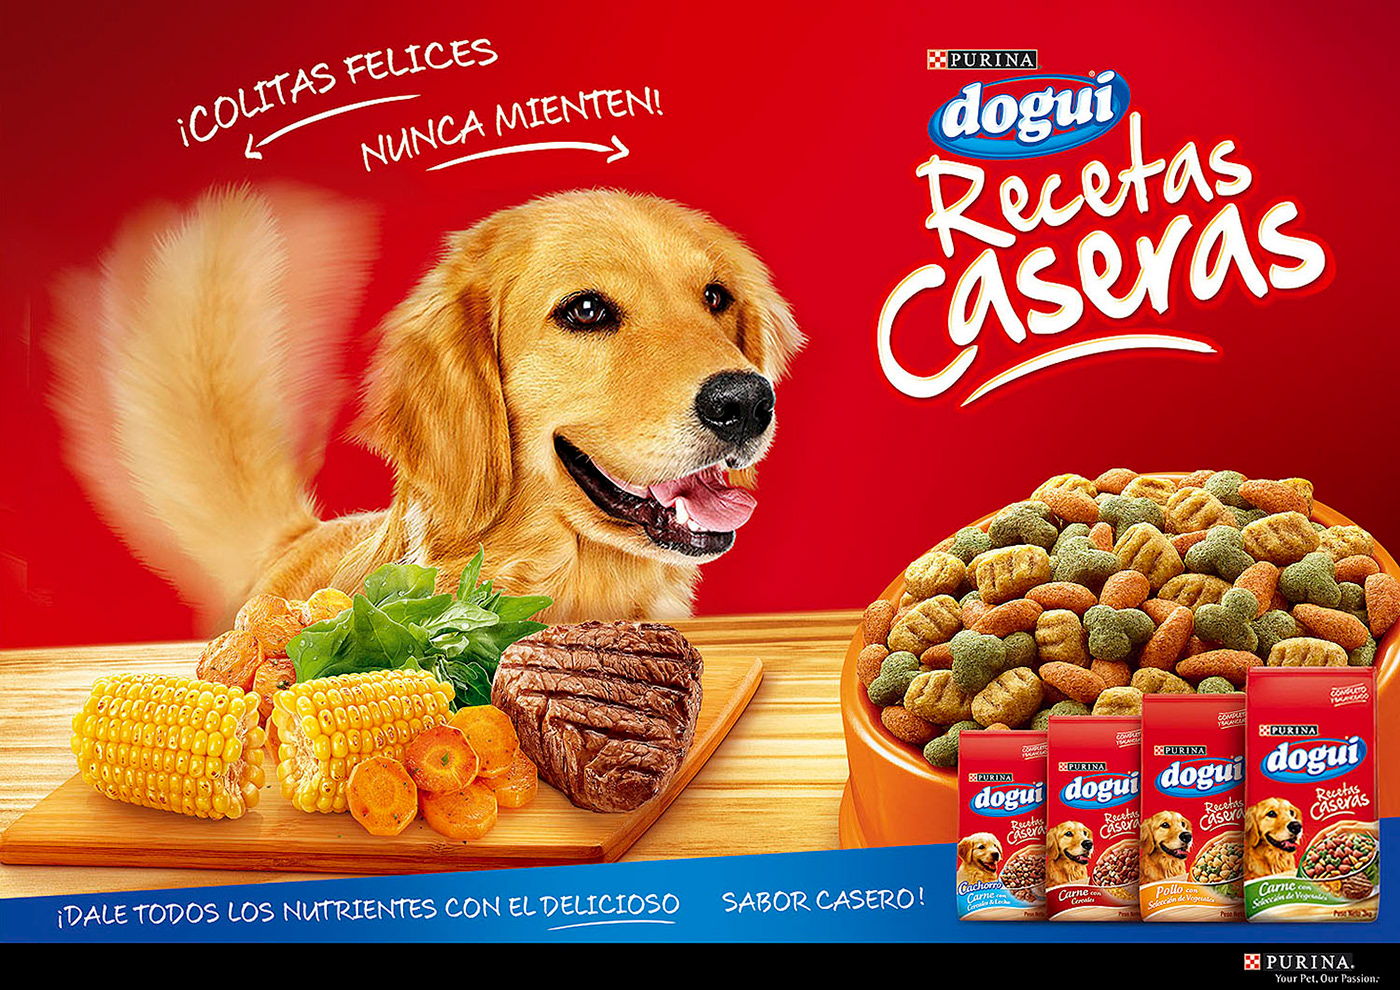 photo retoucher digital image image fusion culinary photography Photography for Packaging creative retouch Image Composition Estudio Bê dog nestle